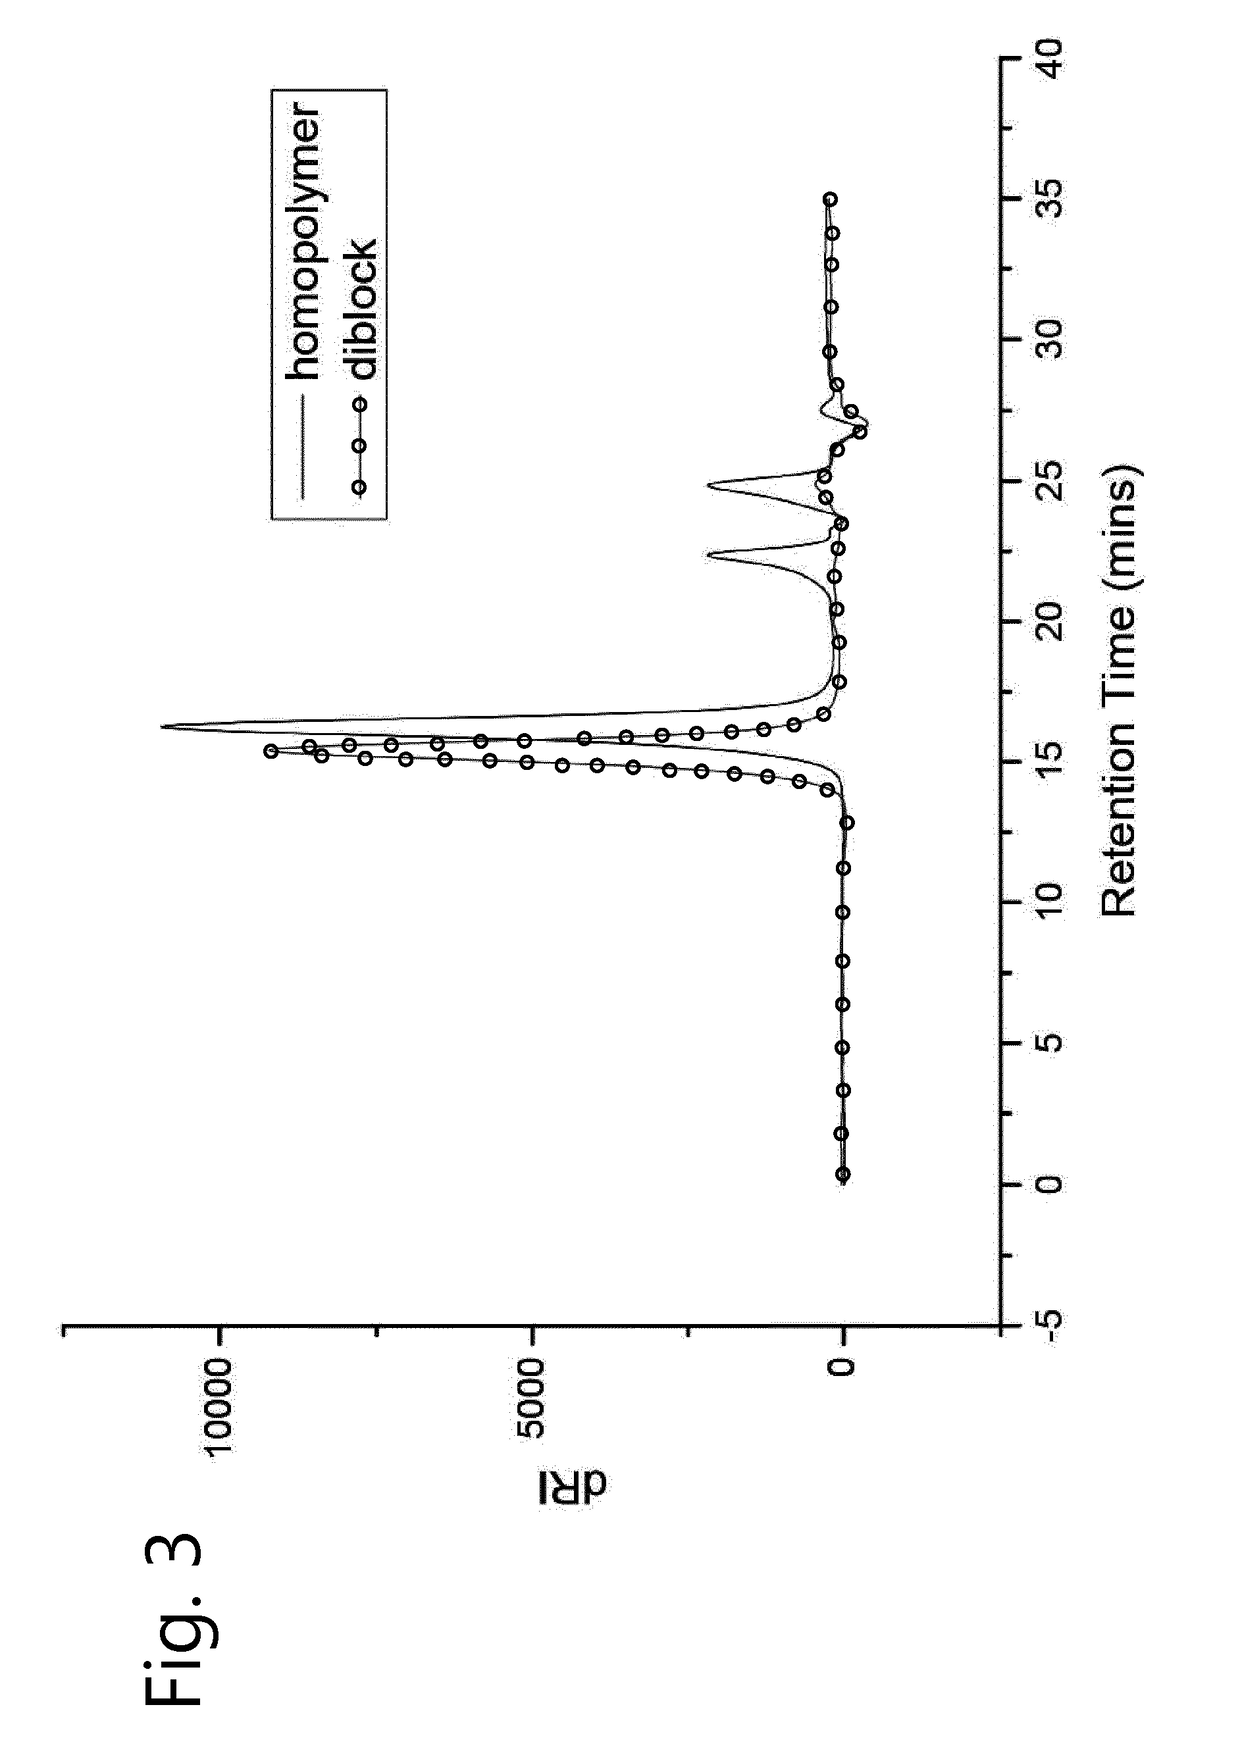 Method for the preparation of uniform, high molar mass cyclic imino ether polymers